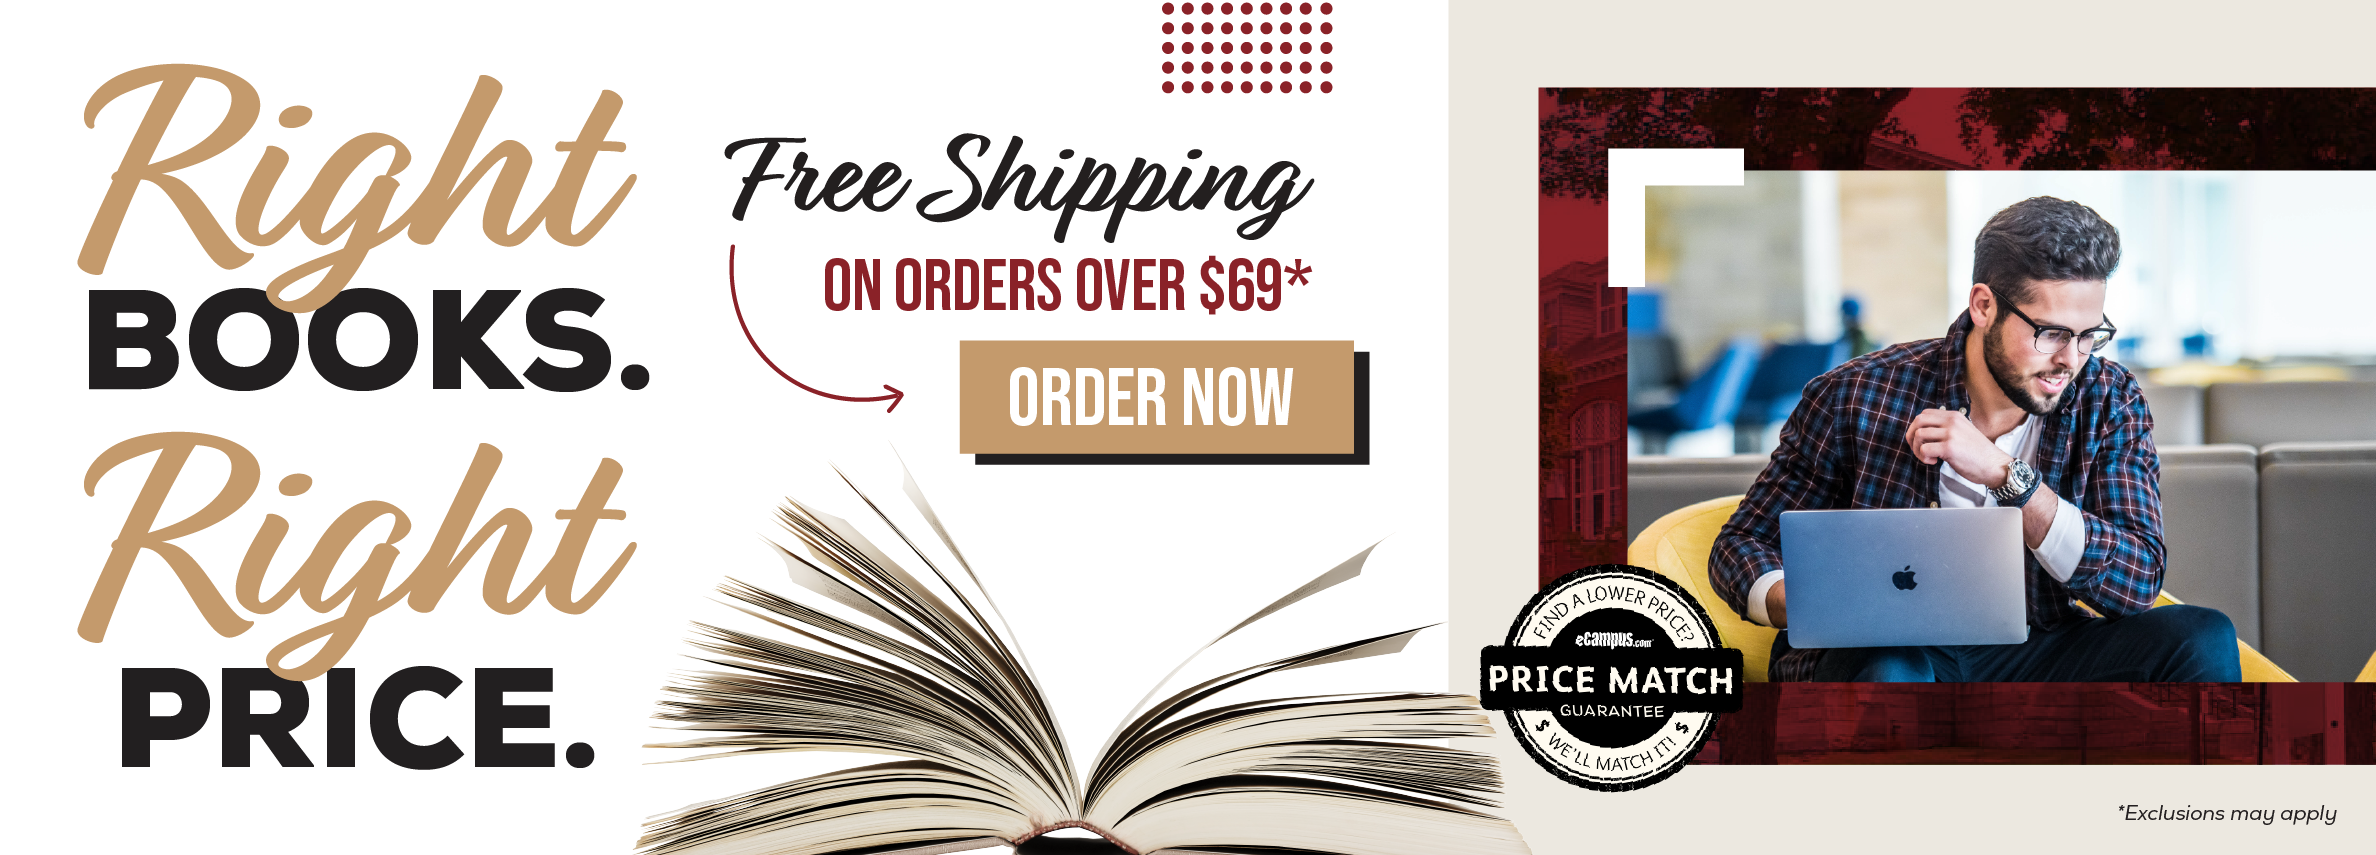 Right books. Right price. Free shipping on orders over $69.* Order now. Price Match Guarantee. *Exclusions may apply.